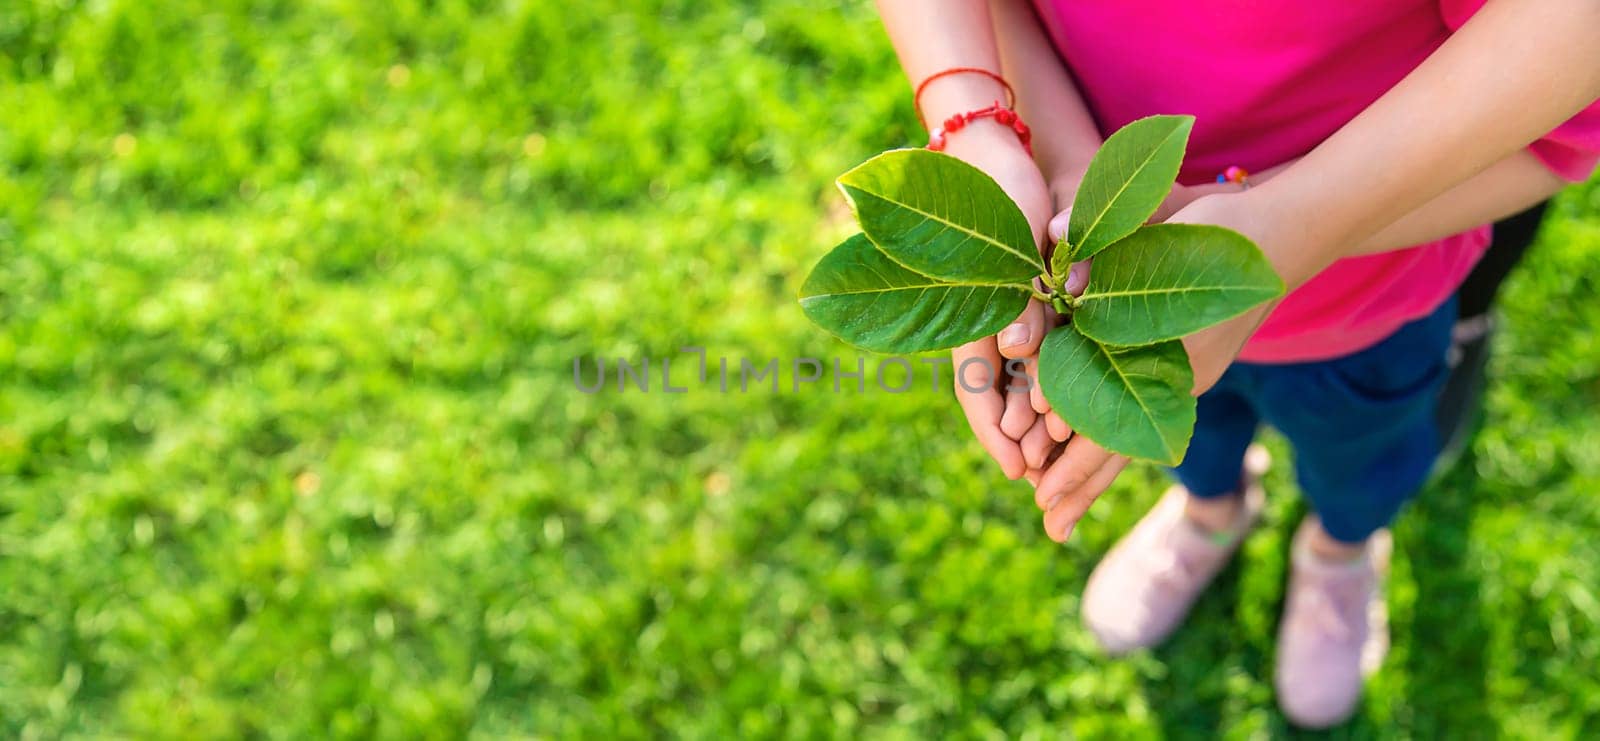 Children take care of nature tree in their hands. Selective focus. Kid.